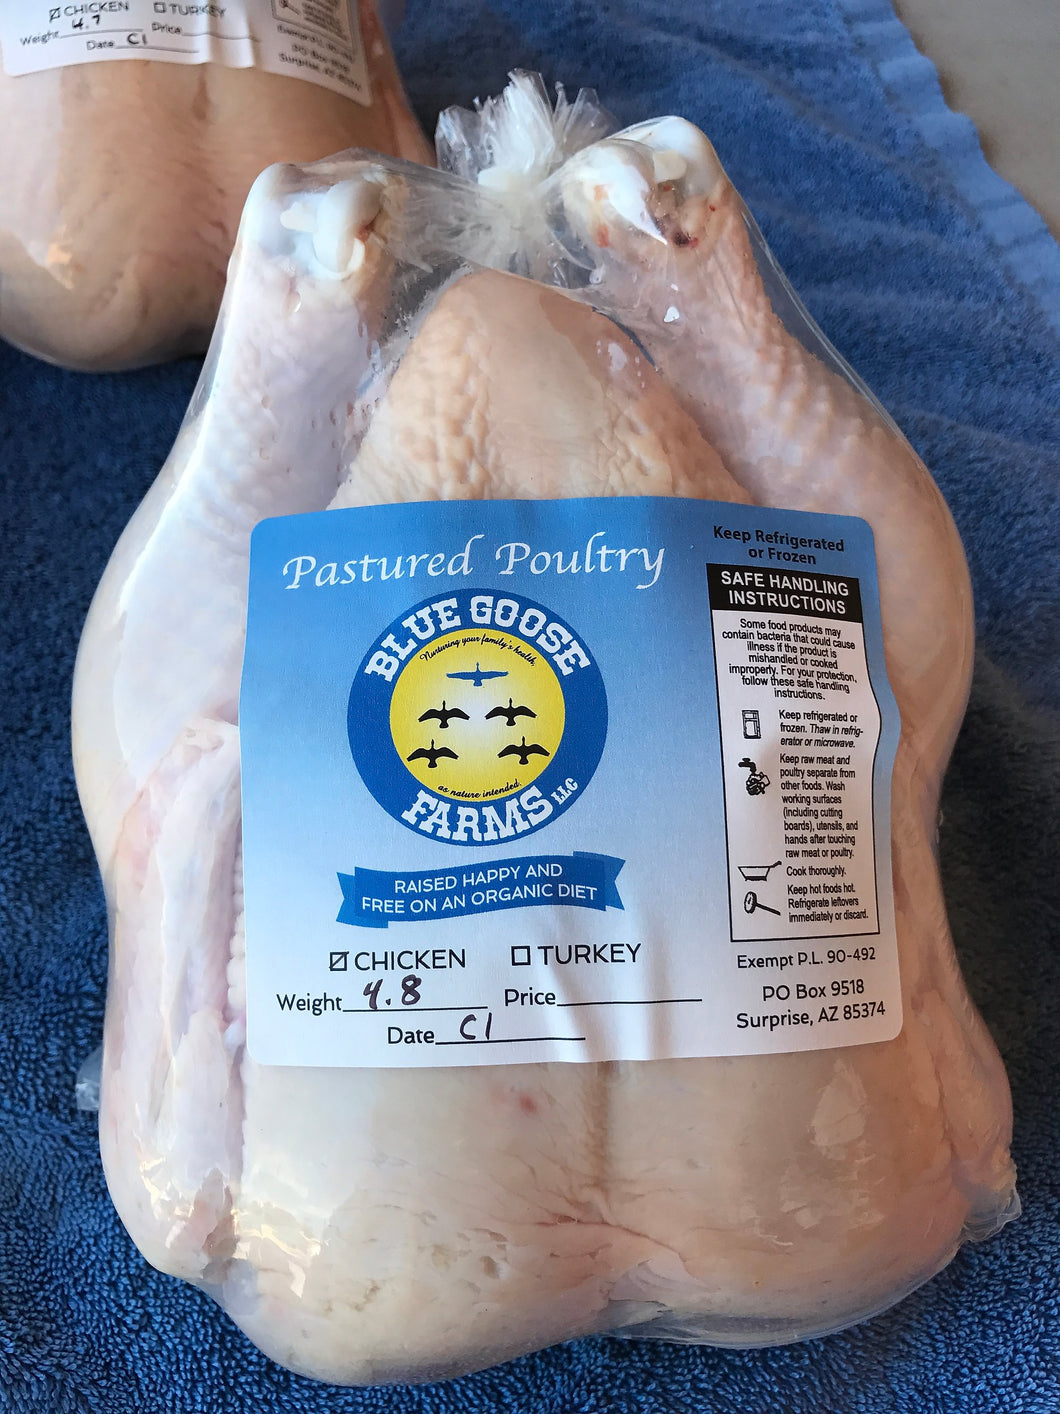 Whole chicken 1-2lbs